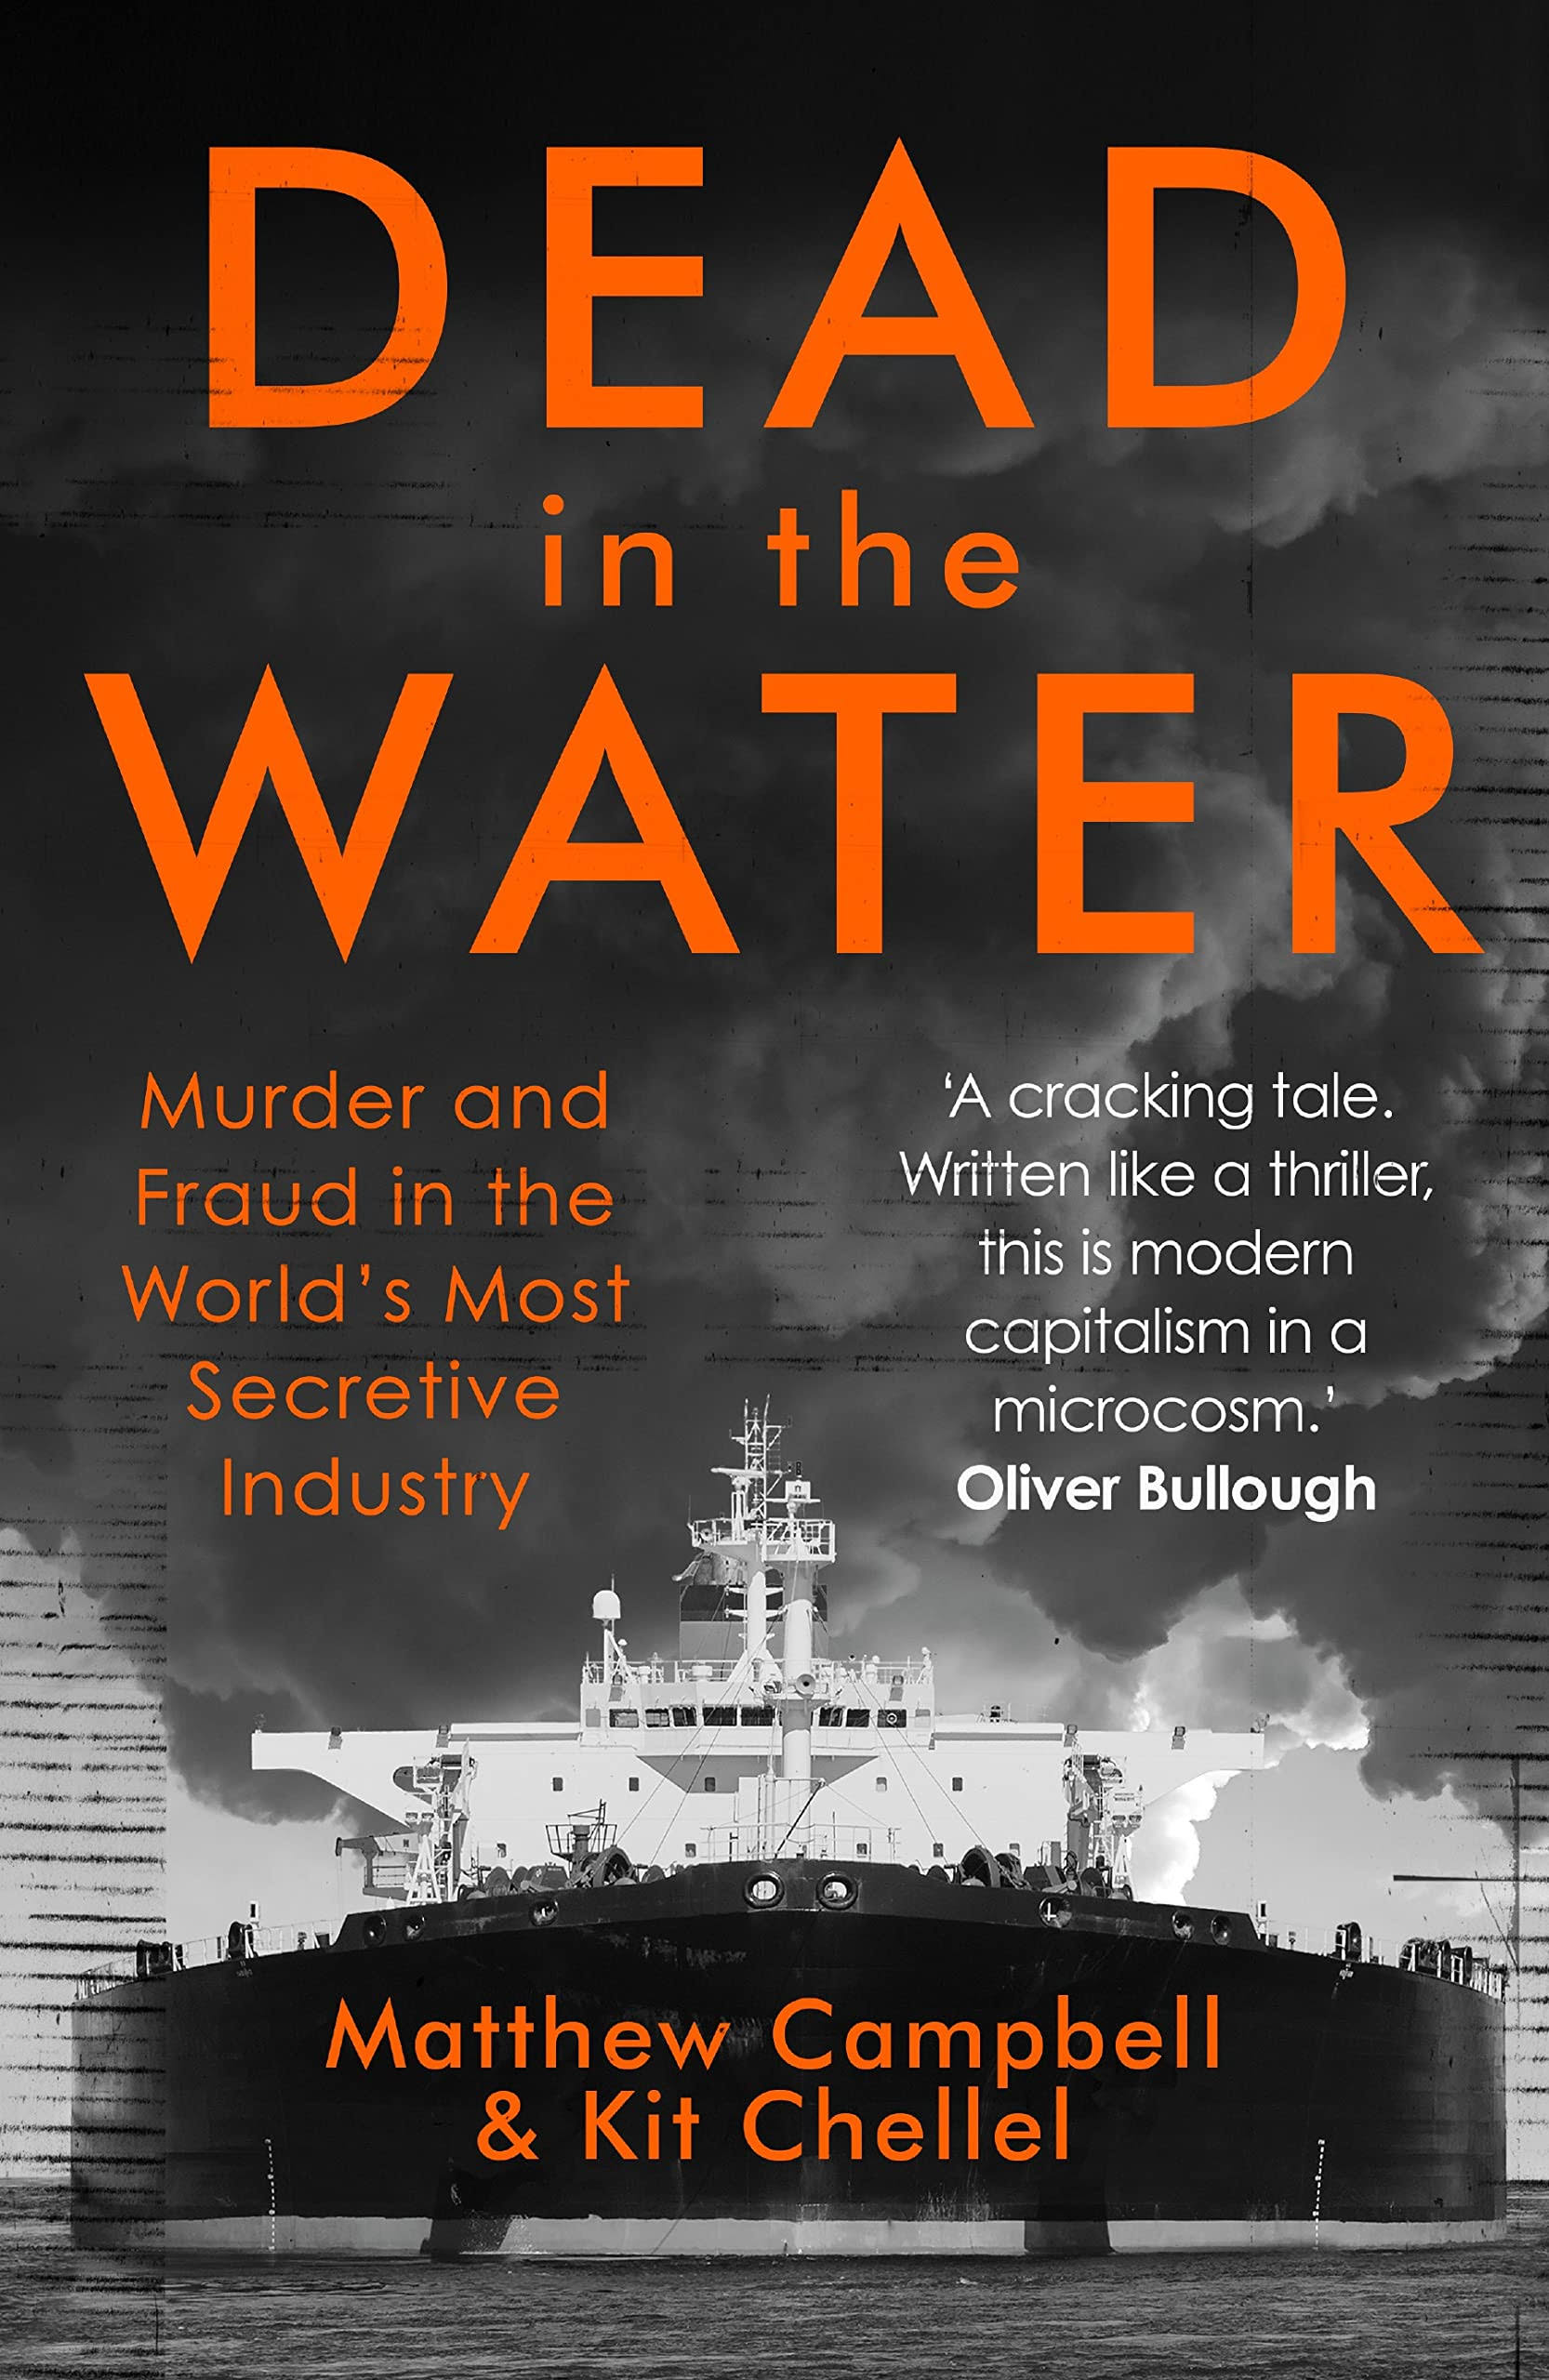 Dead in the Water: Murder and Fraud in the World's Most Secretive Industry [Book]